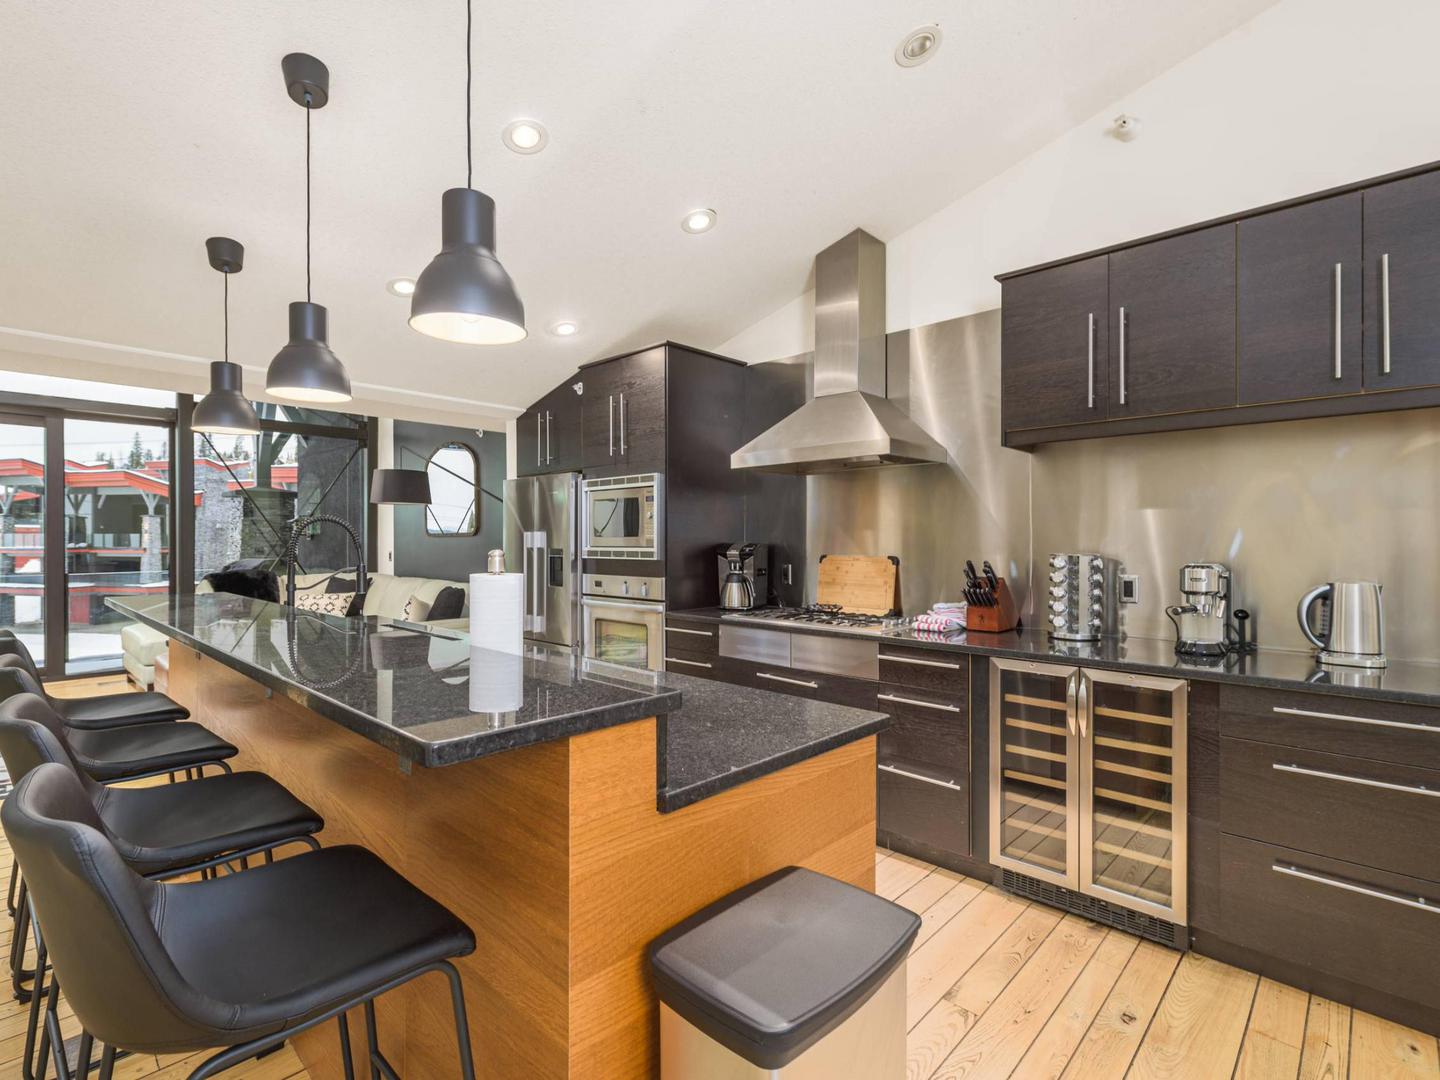 A luxury gourmet kitchen with dark countertops and cupboards and wooden accents in the Edge 3 luxury vacation rental.